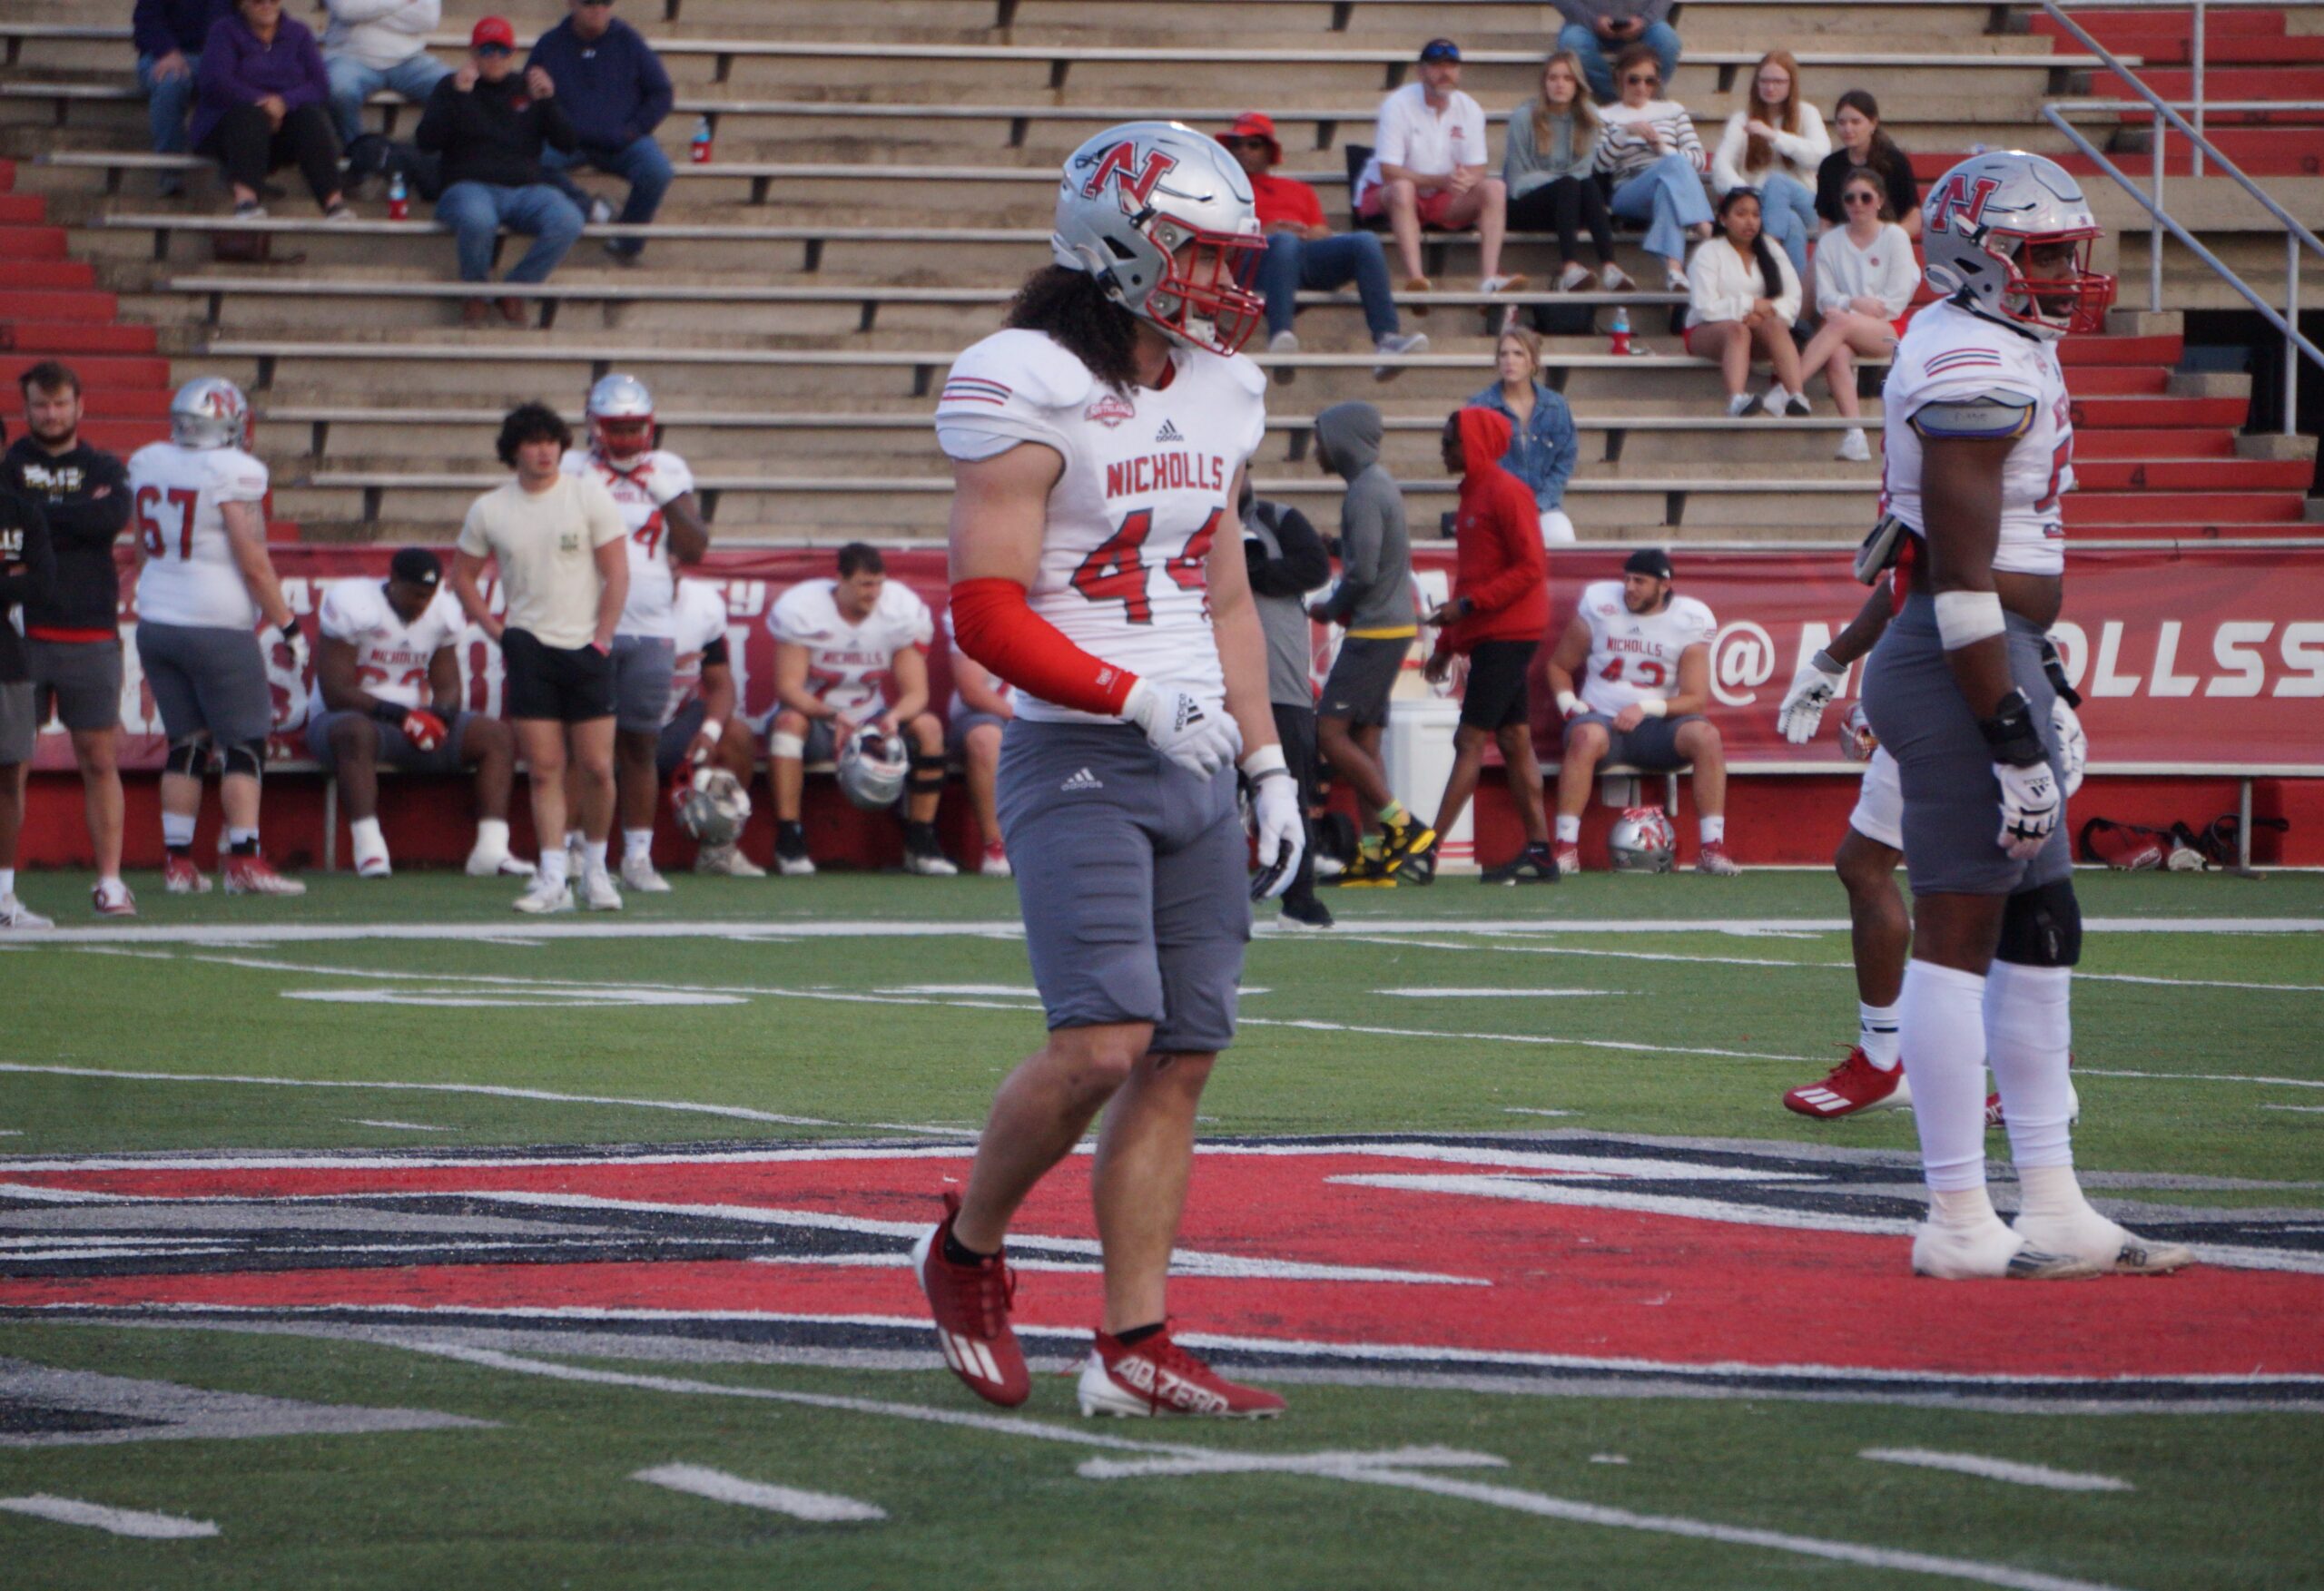 Thumbnail for Big-play defense sparks White team to 23-7 win over Red squad in Nicholls Spring Game